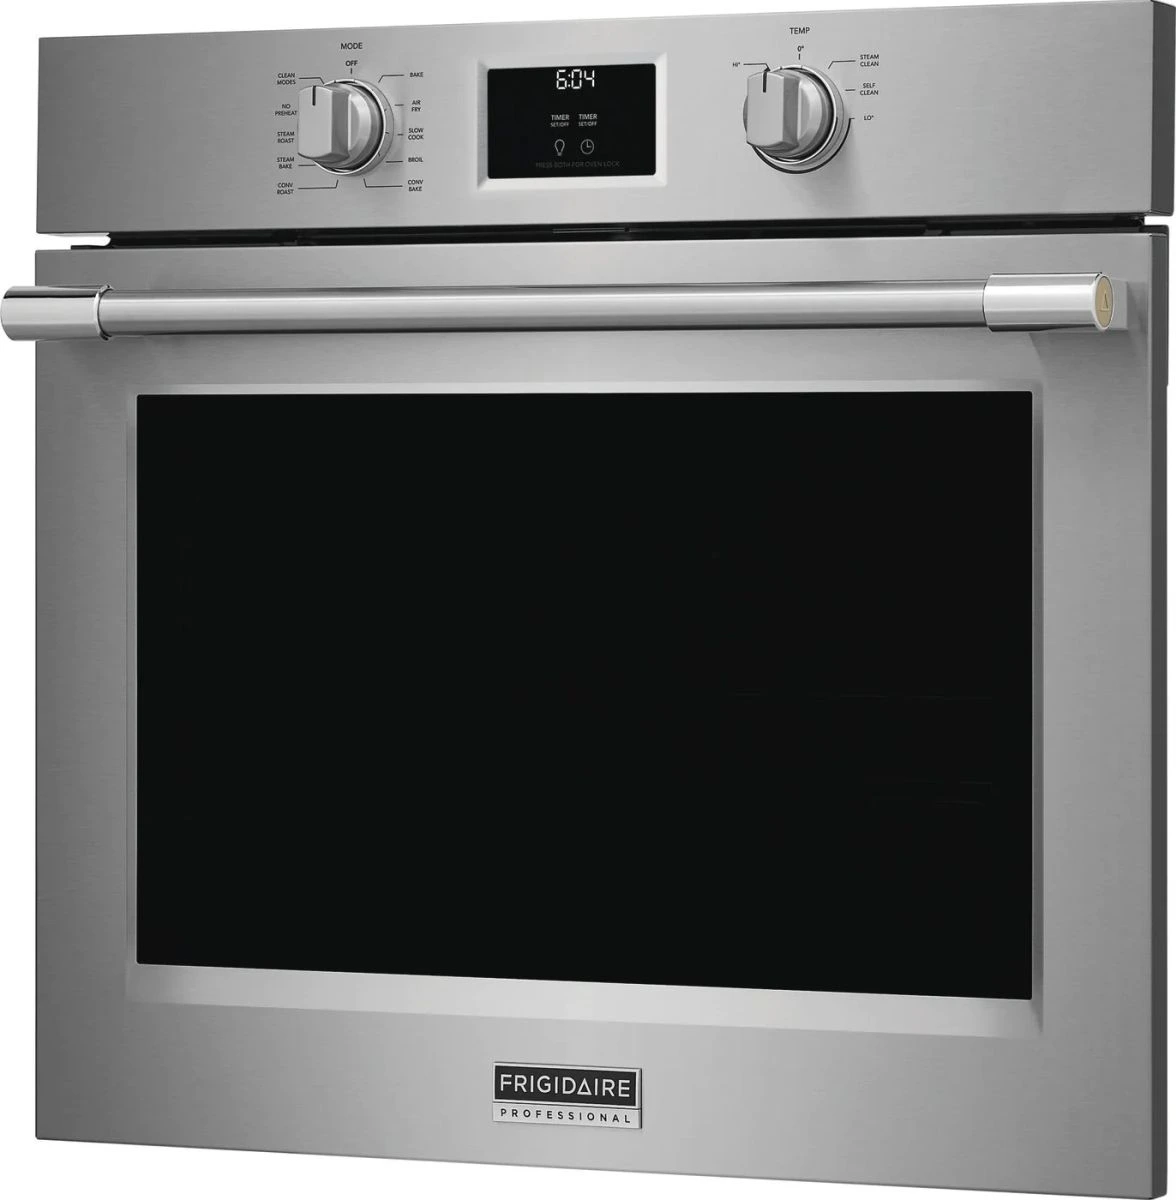 Front view of the Frigidaire Professional PCWS3080AF electric oven 